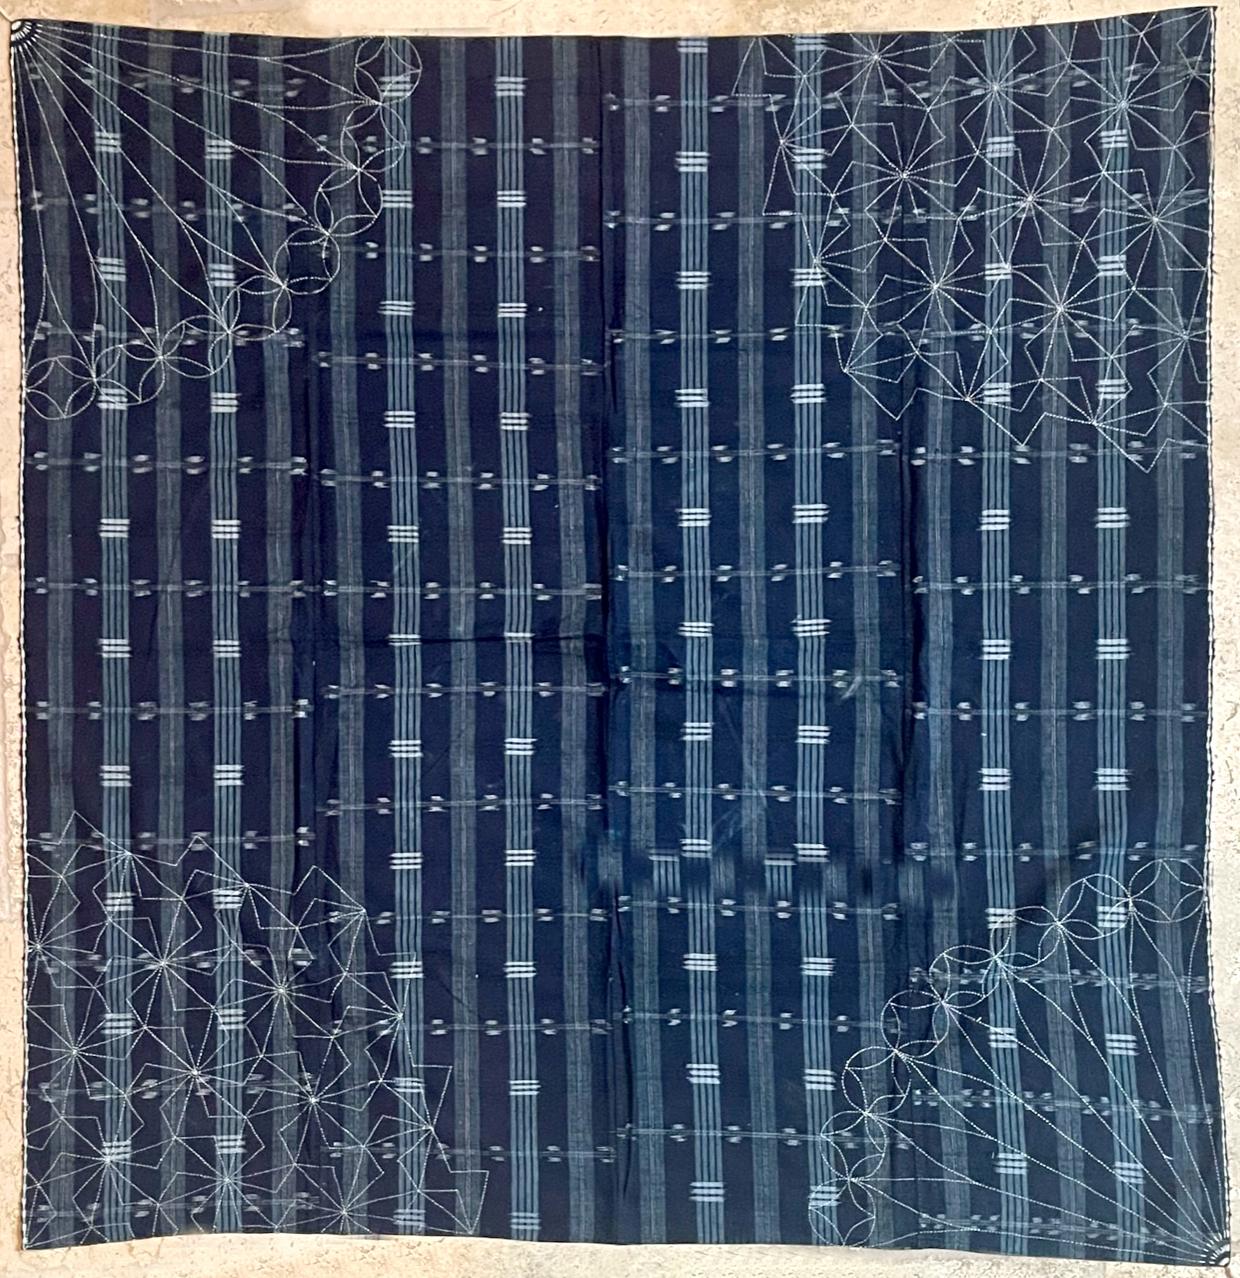 A Japanese hand-woven textile panel with indigo blue background with alternative white stripes intercepted with shorter horizontal ikat bands. Sewn together from four loom-woven narrower stripes, the large panel likely served as a Futonji (futon